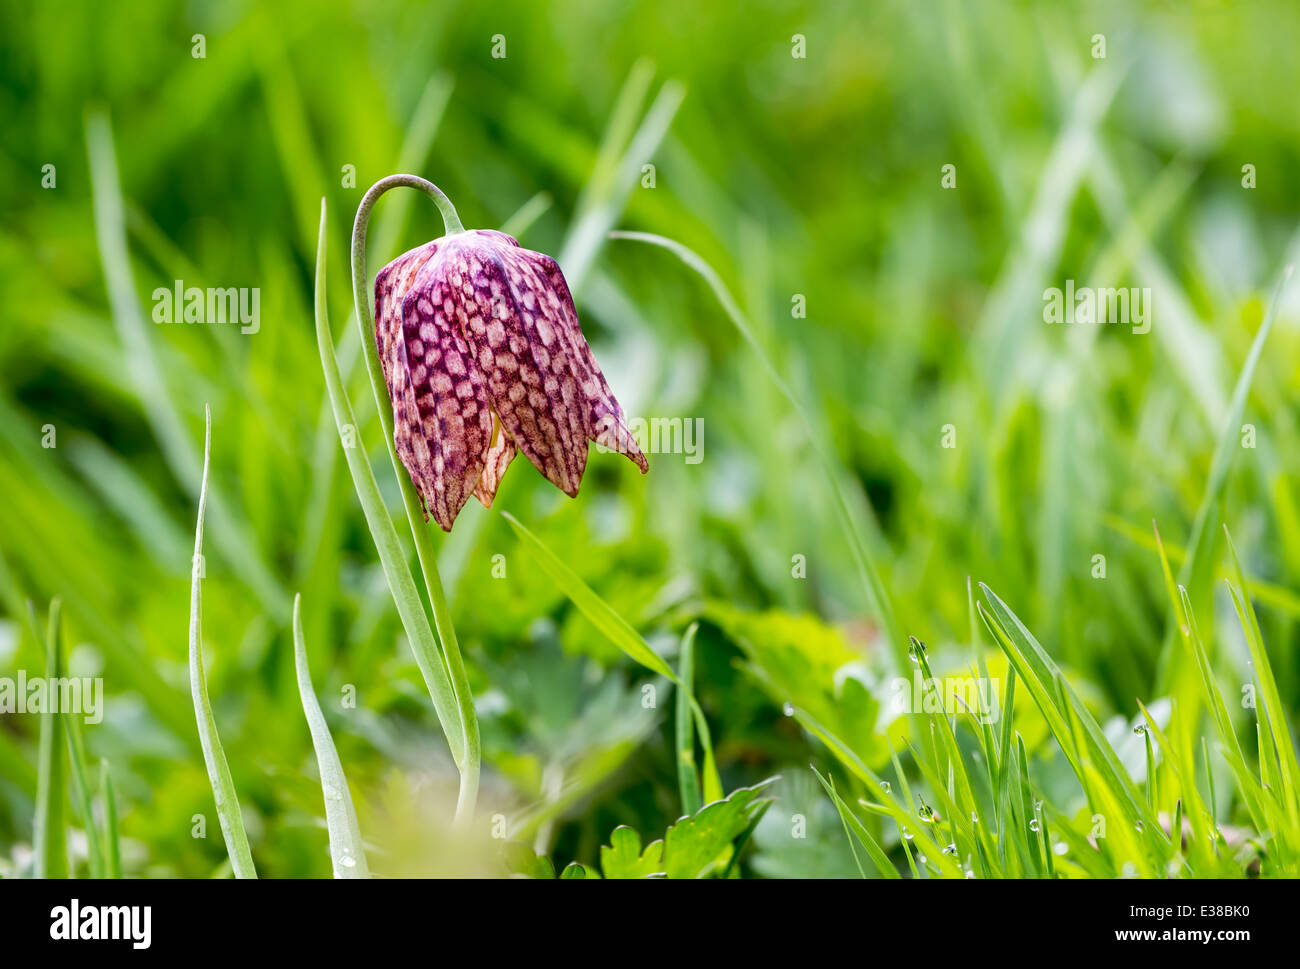 Fritillaria meleagris is a species of flowering plant in the family Liliaceae. Flower on a background of grass after rain Stock Photo